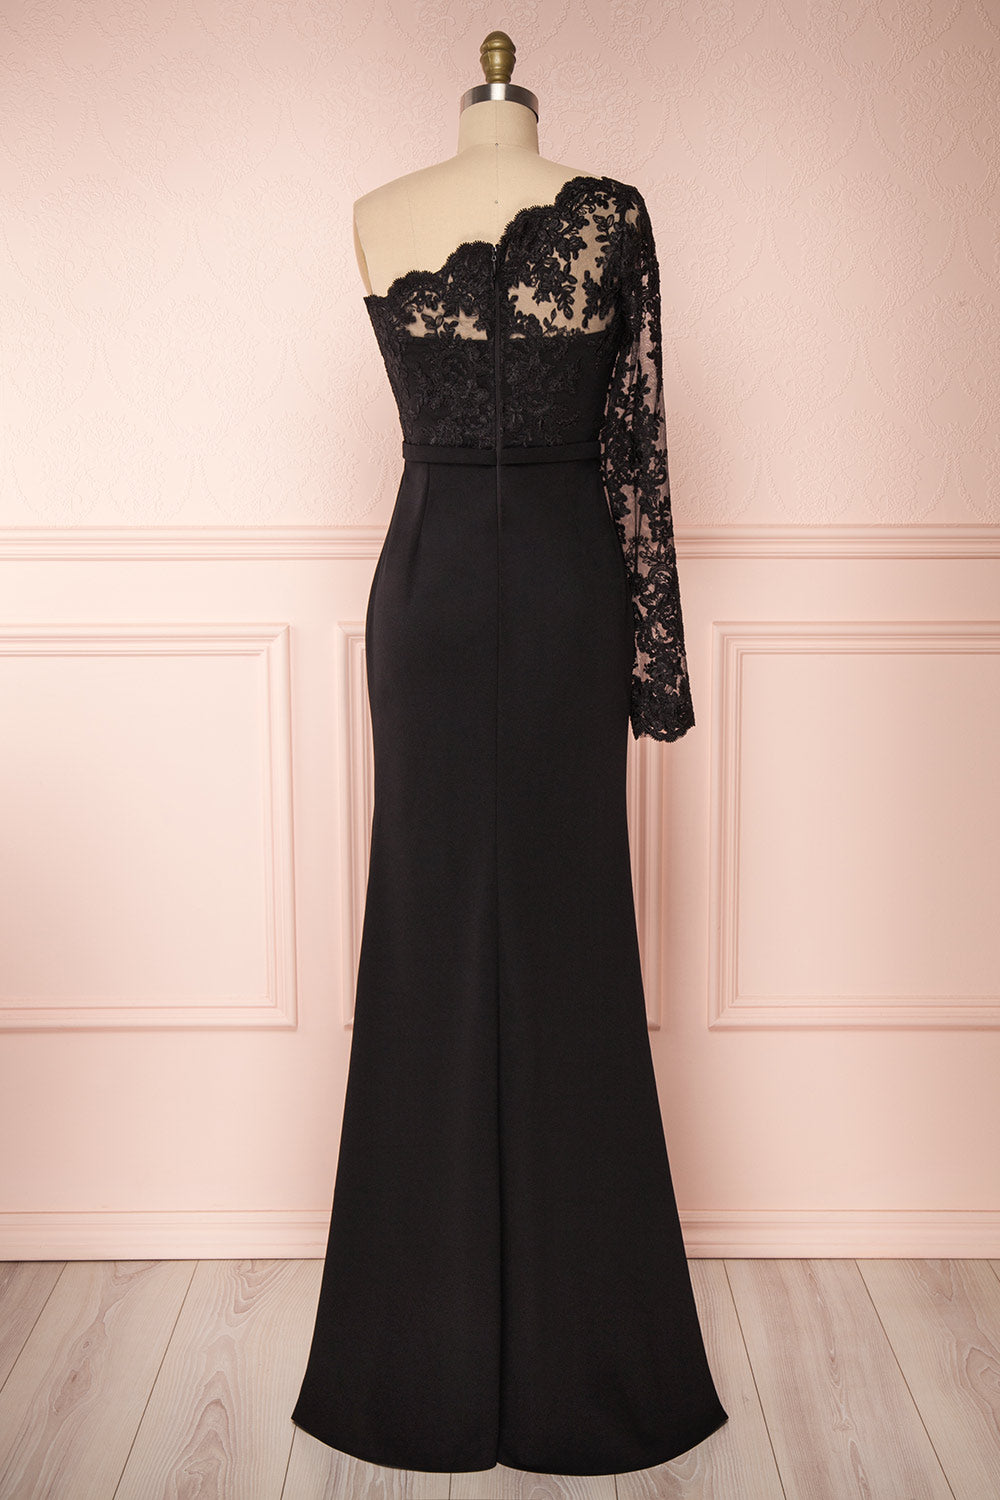 Xylia Black One Long Sleeve Maxi Dress | Boutique 1861 back view